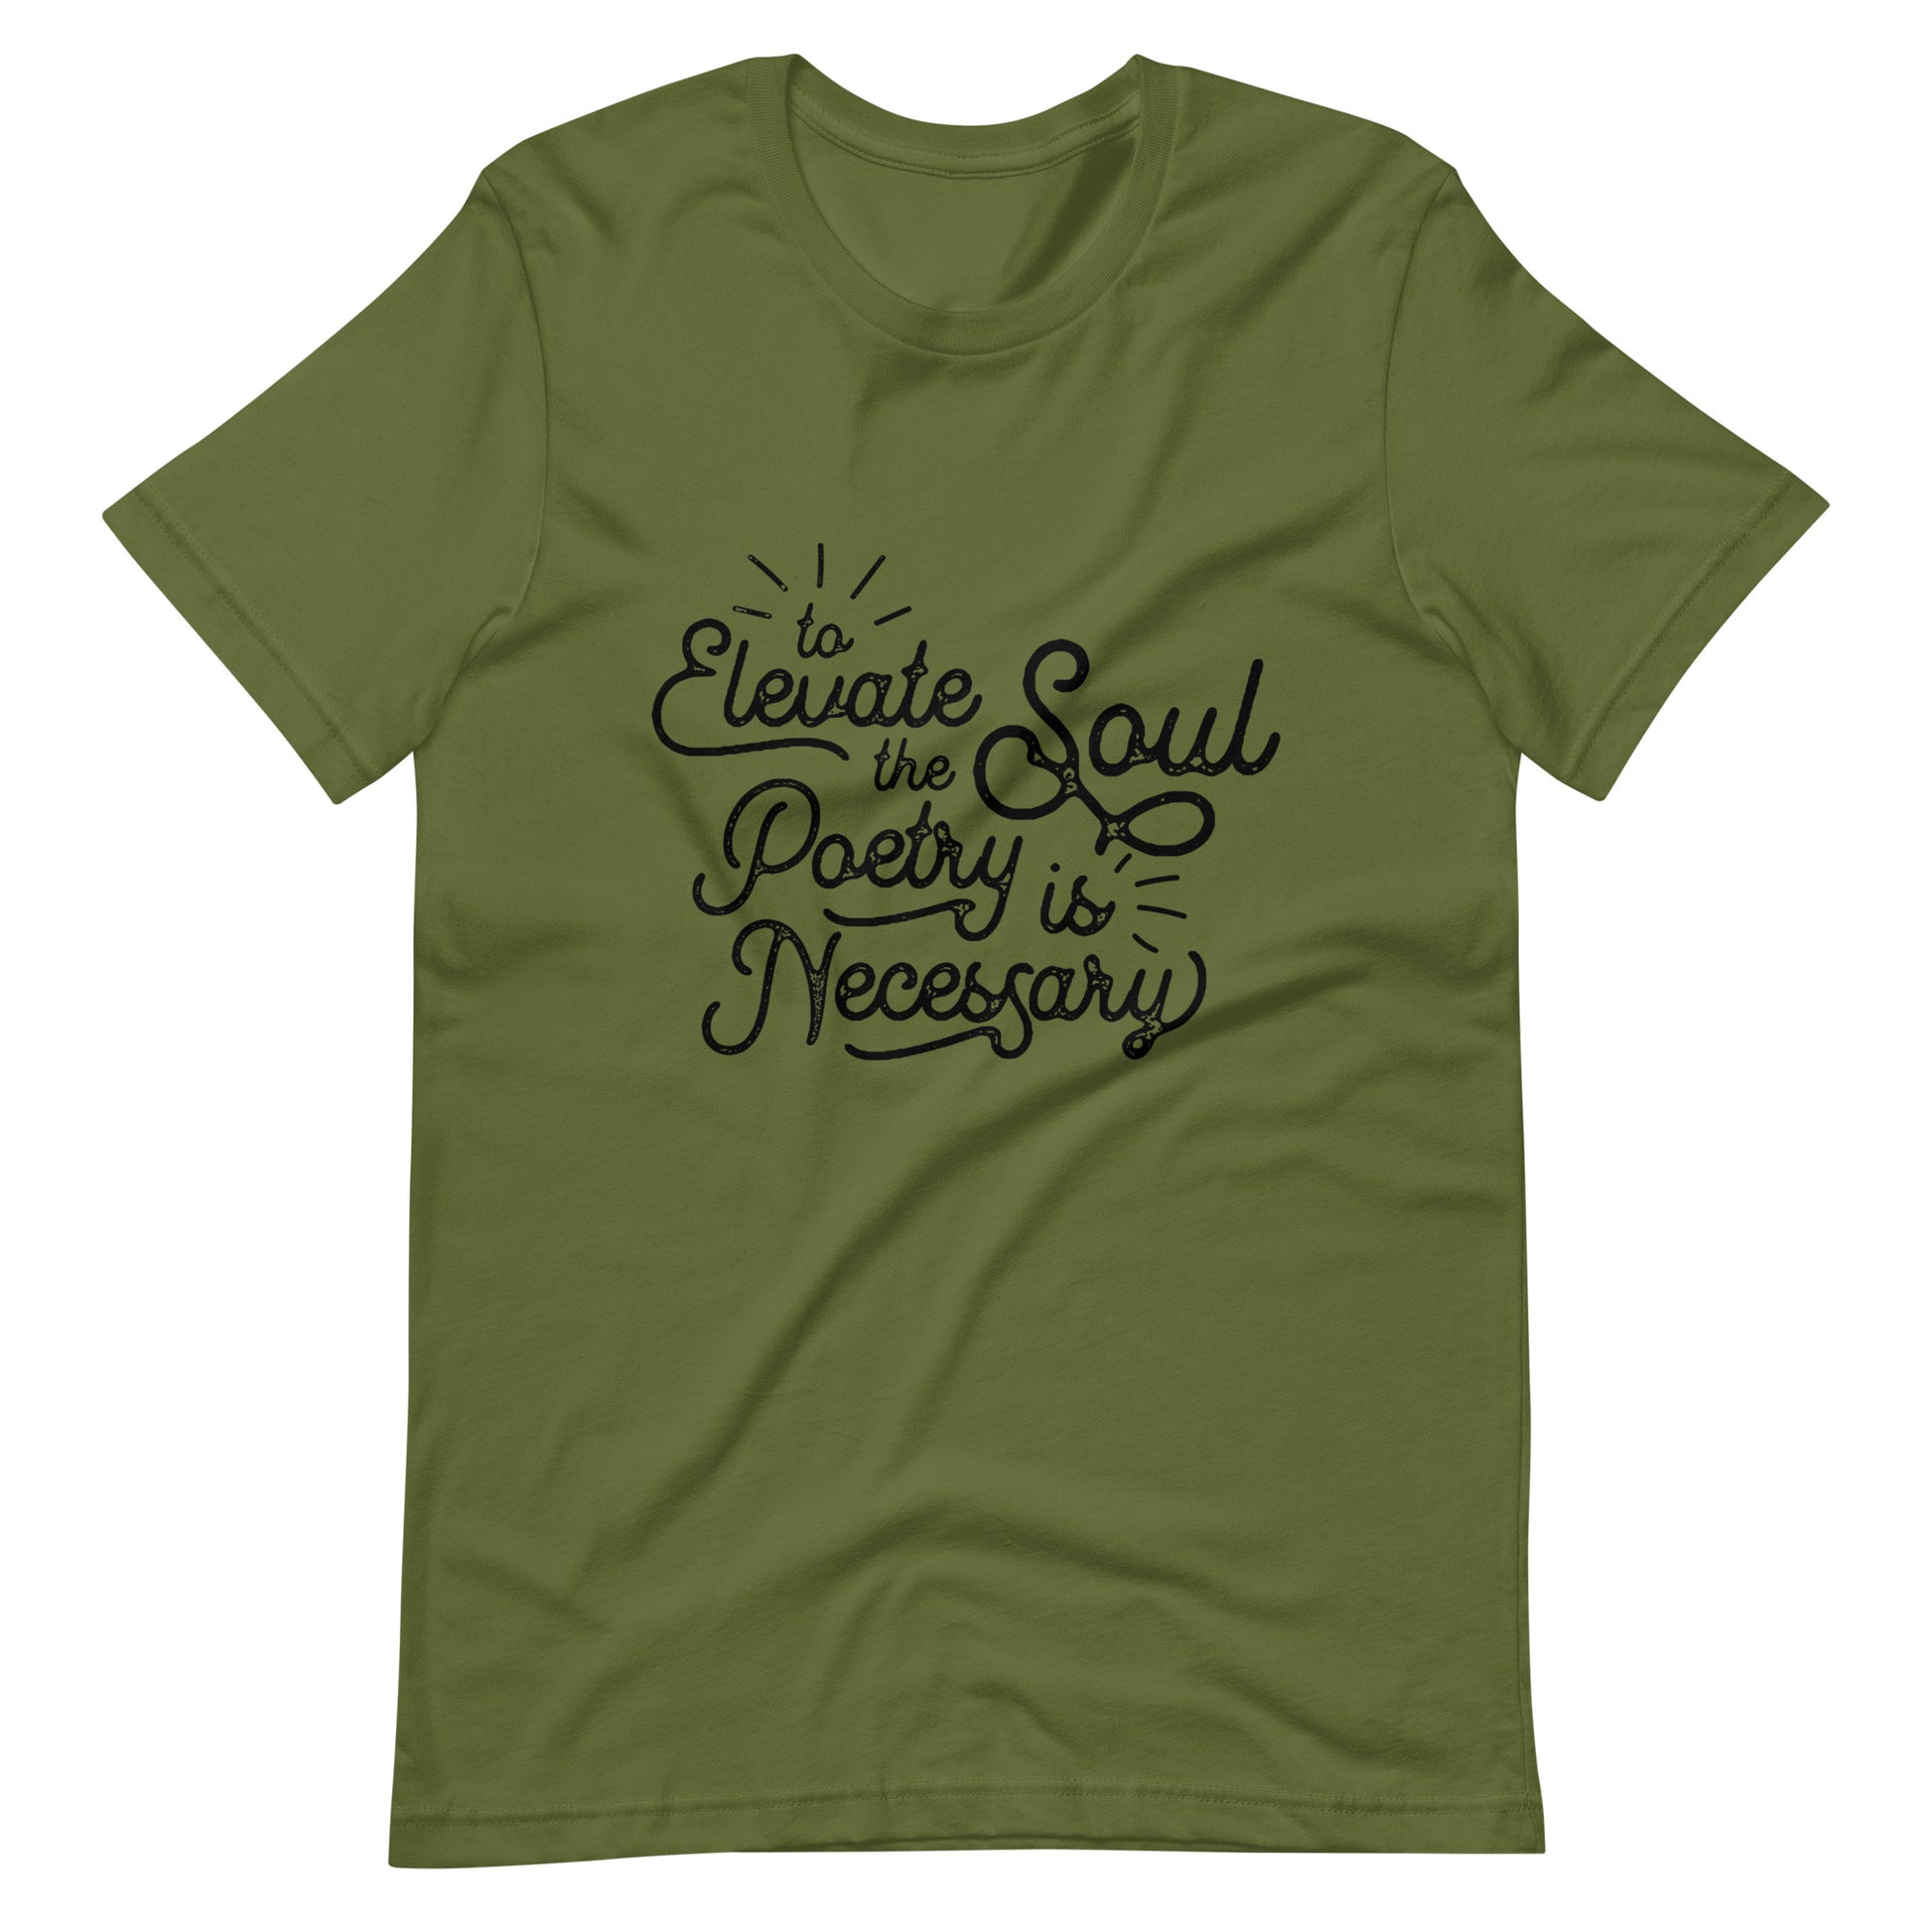 To Elevate the Soul Edgar Allan Poe Quote - Men's t-shirt - Olive Front